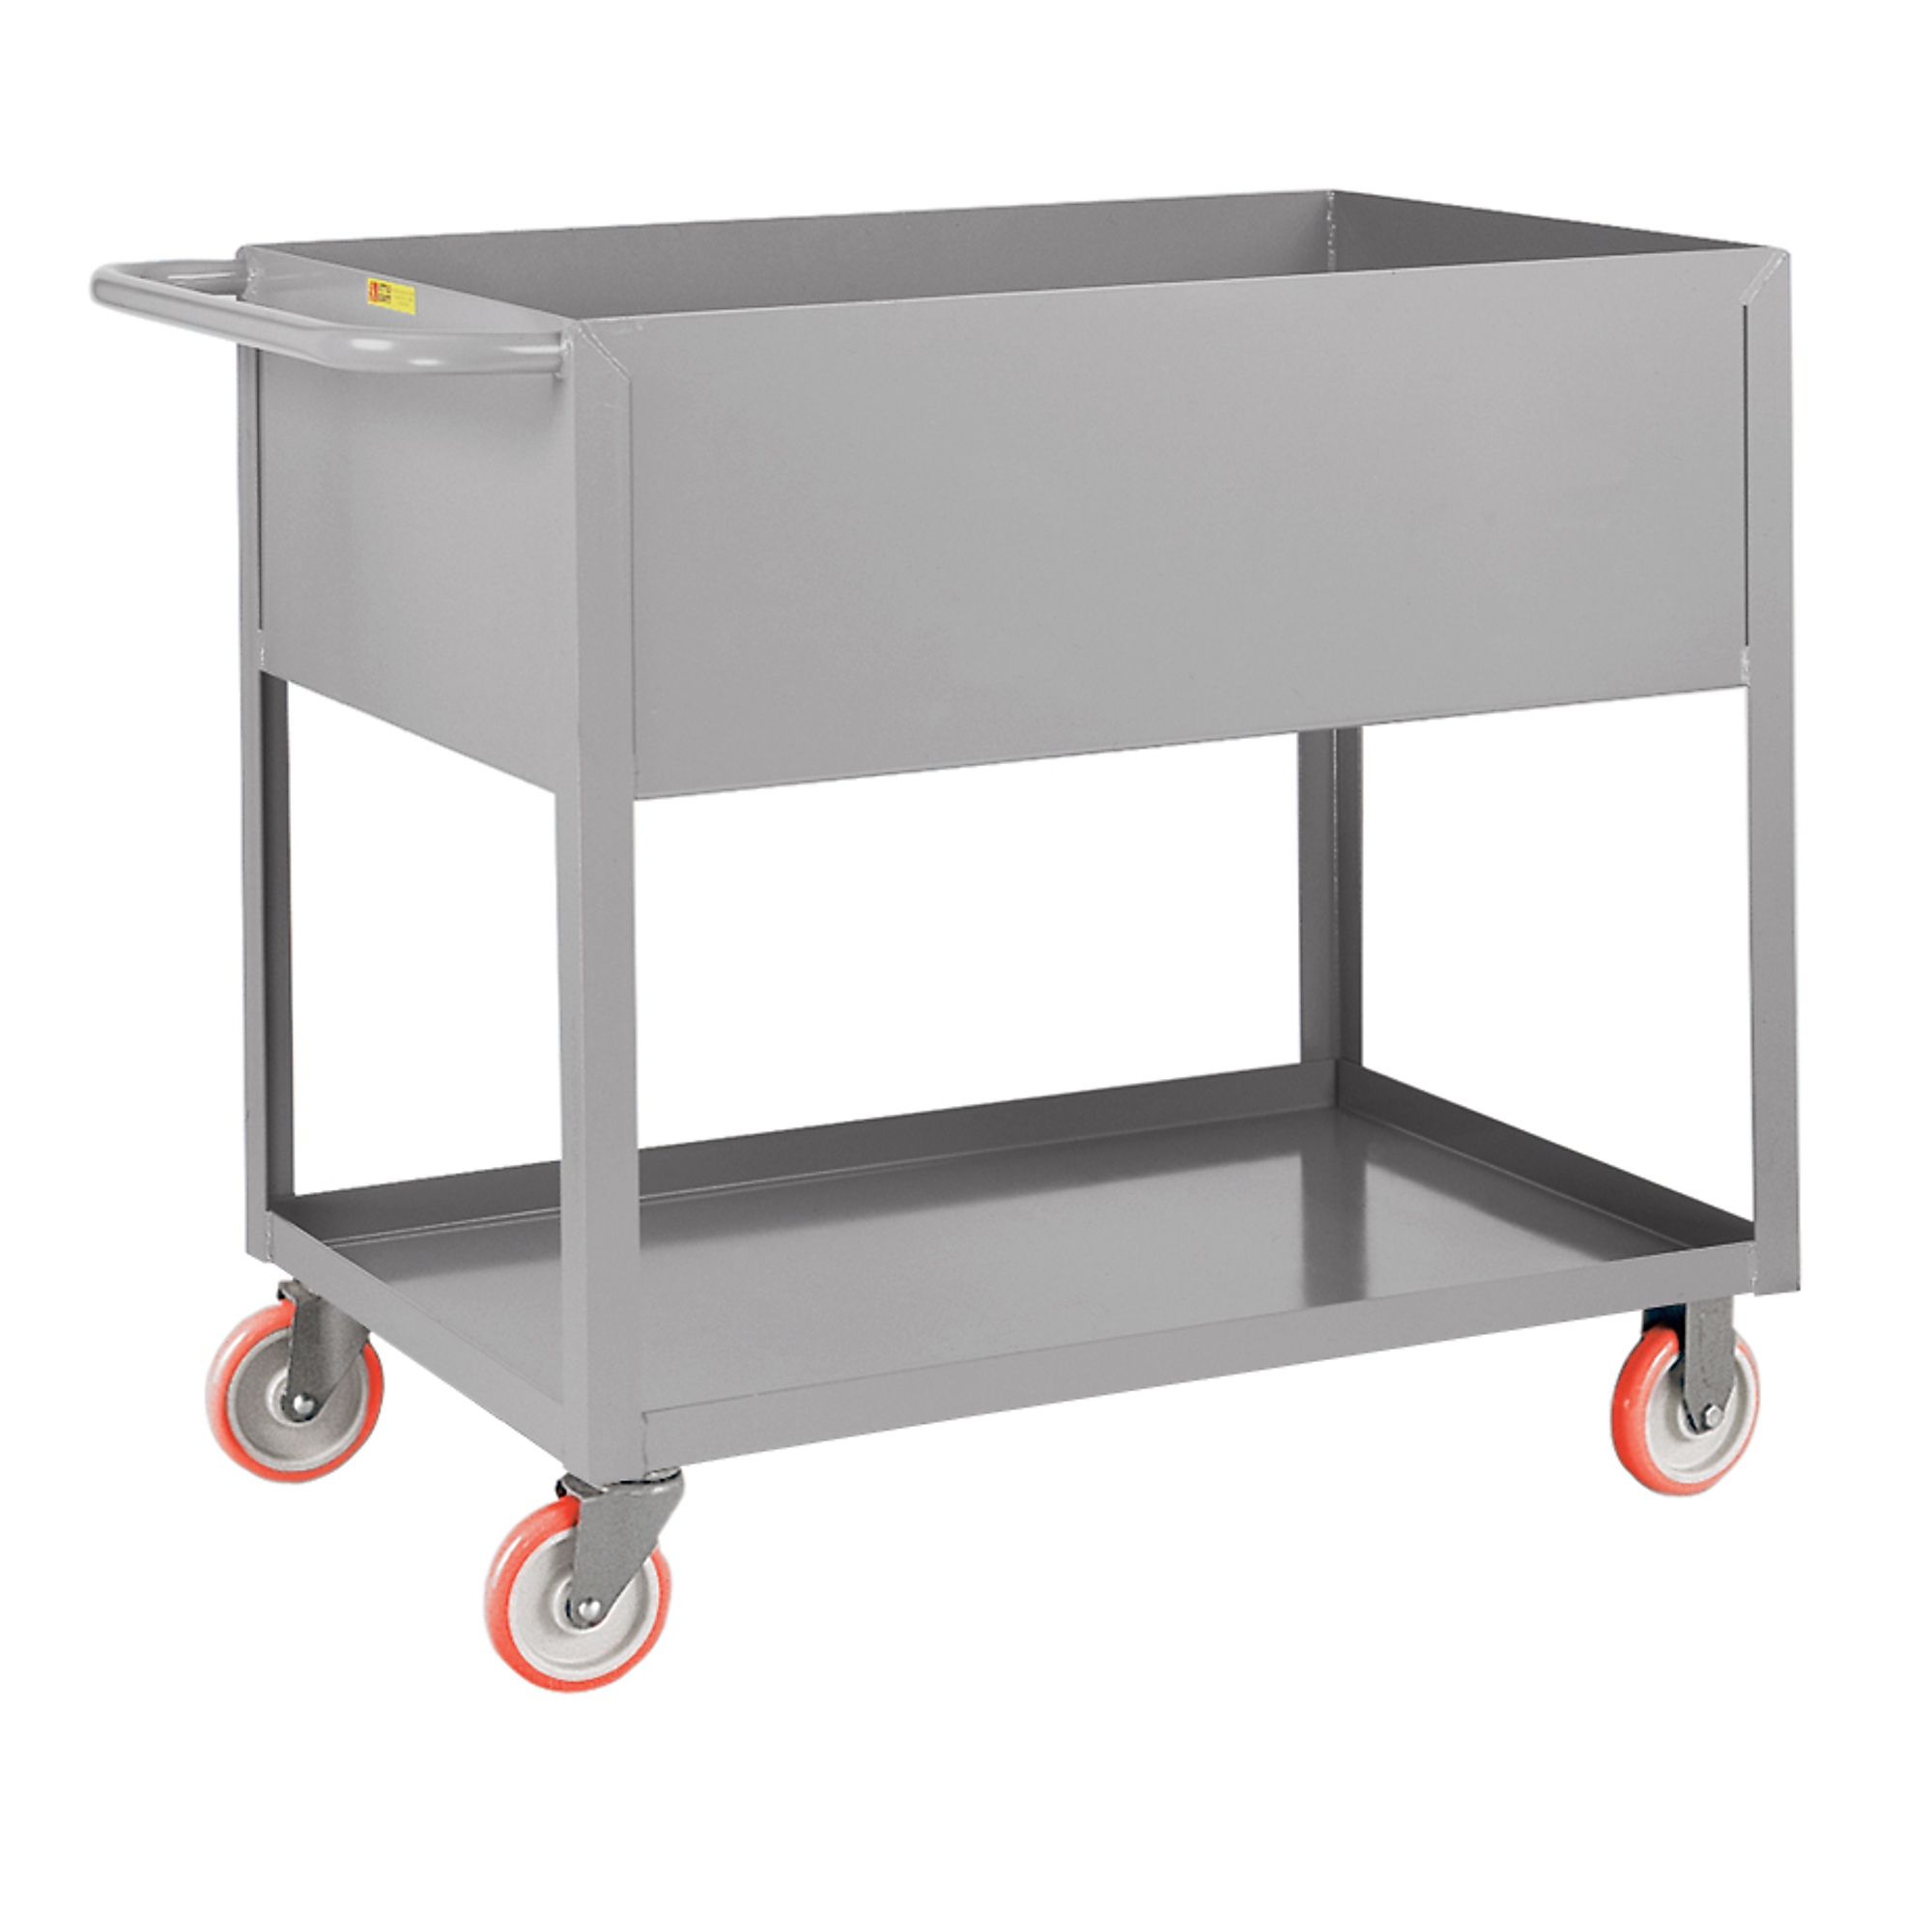 Little Giant, 12Inch Deep Shelf Truck, 24x48, 1200 lbs, Total Capacity 1200 lb, Shelves (qty.) 2, Material Carbon Steel, Model DS2448X12-5PY